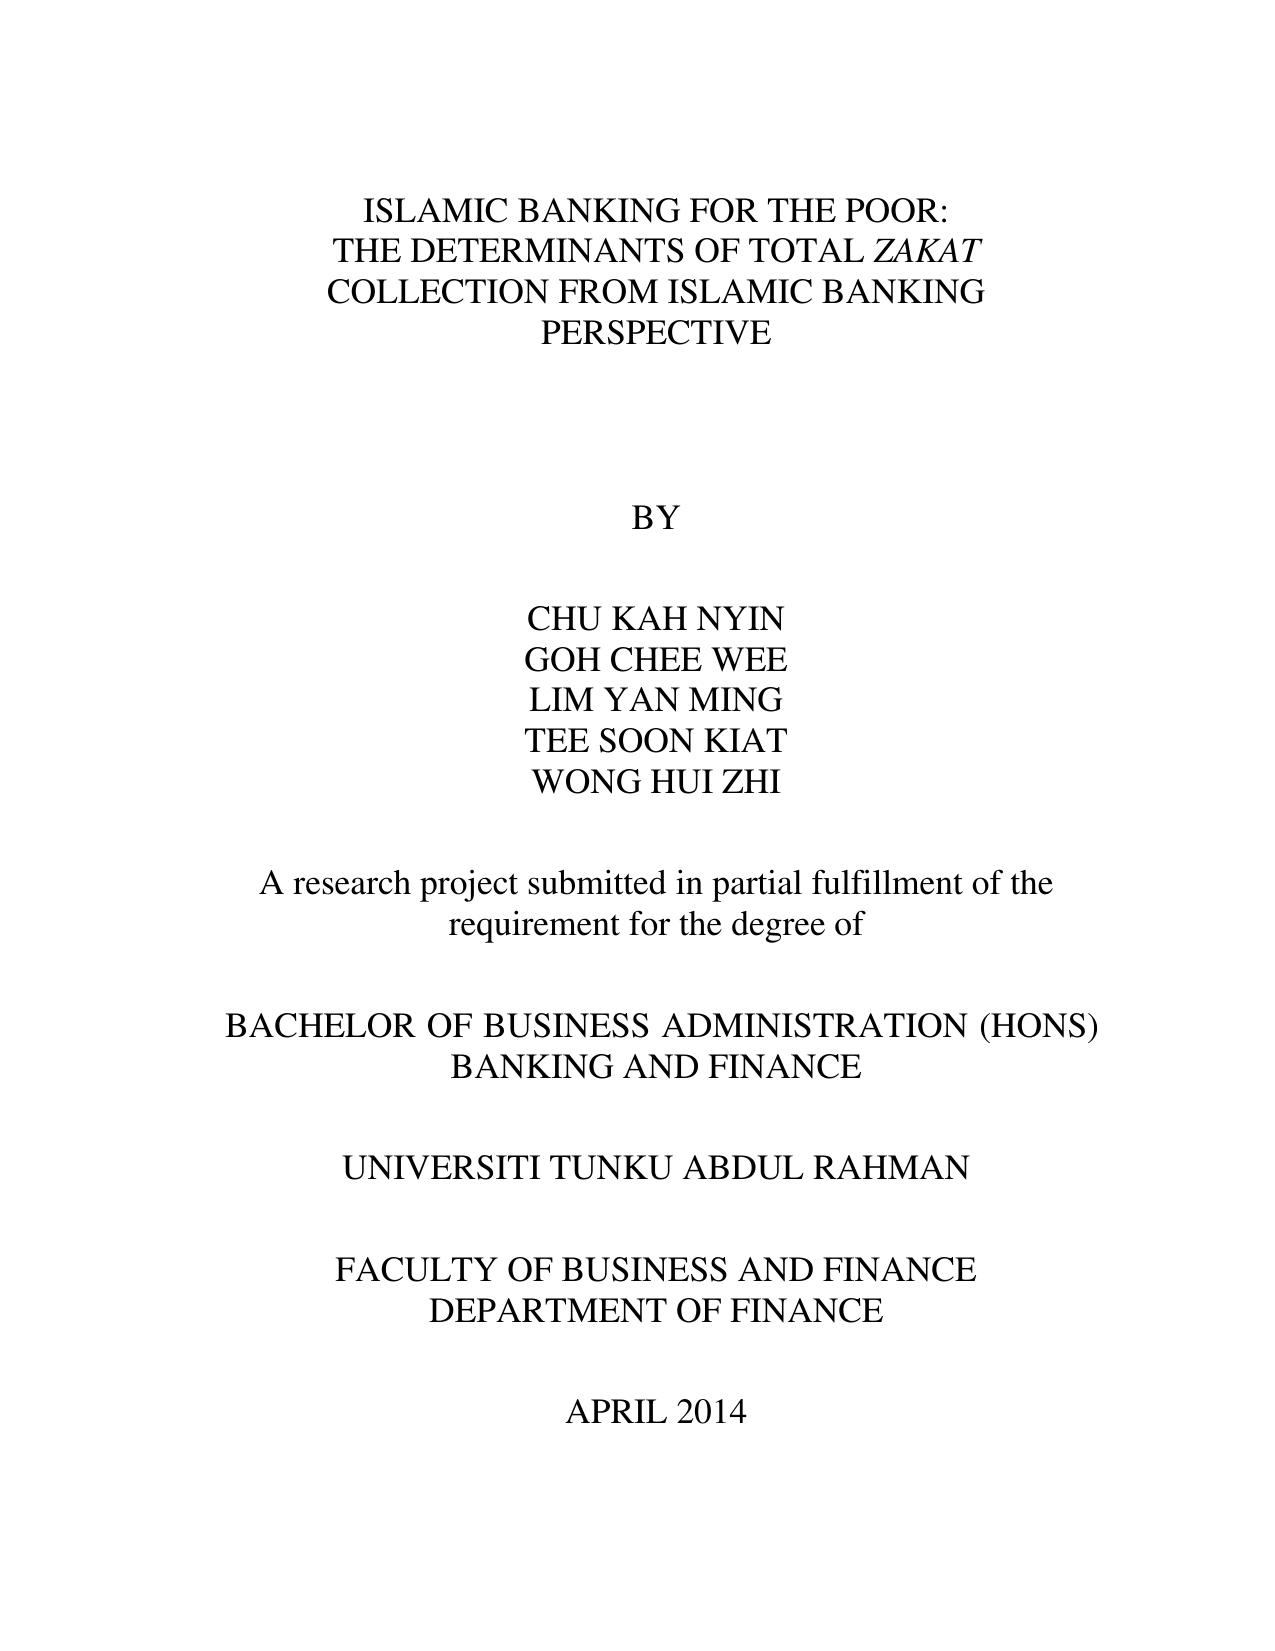 The Determinants of Total Zakat Collection from Islamic Banking Perspective, 2014